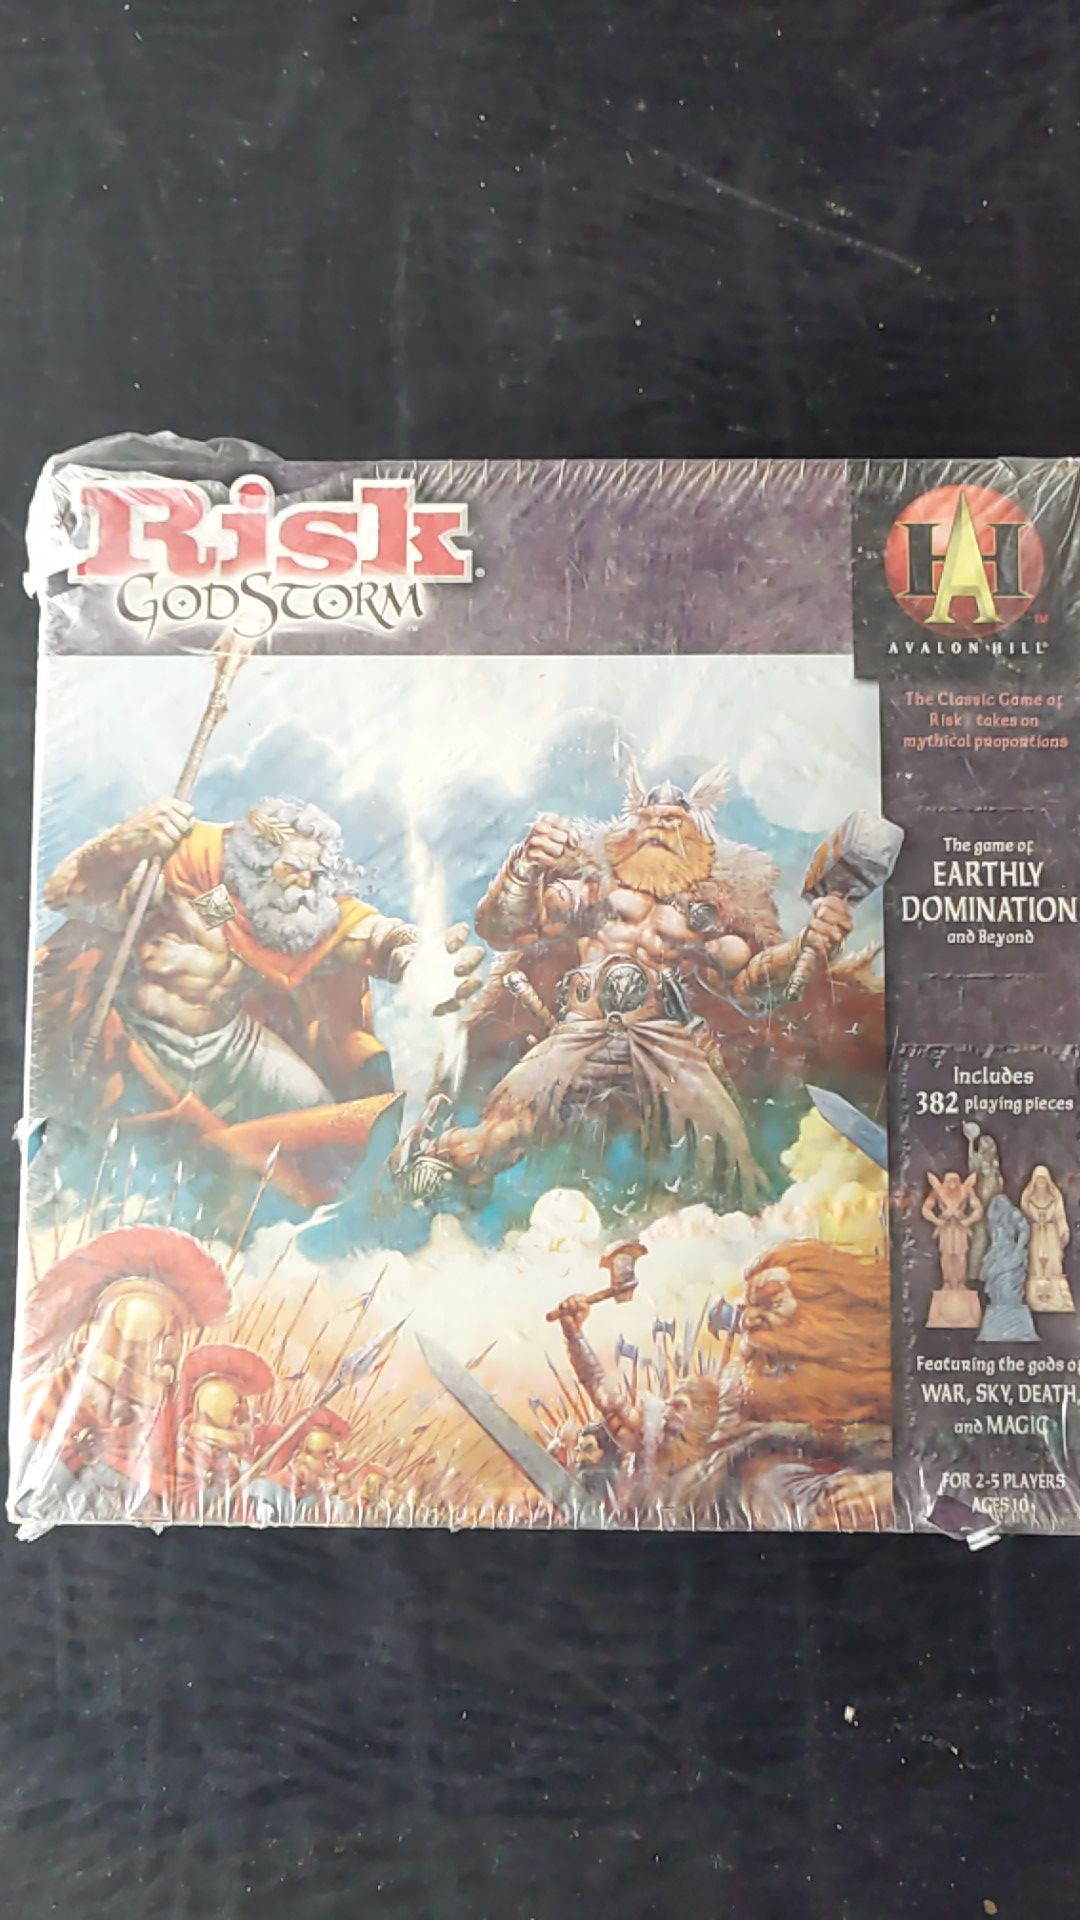 Risk God Storm, The Game of Earthly Domination and Beyond